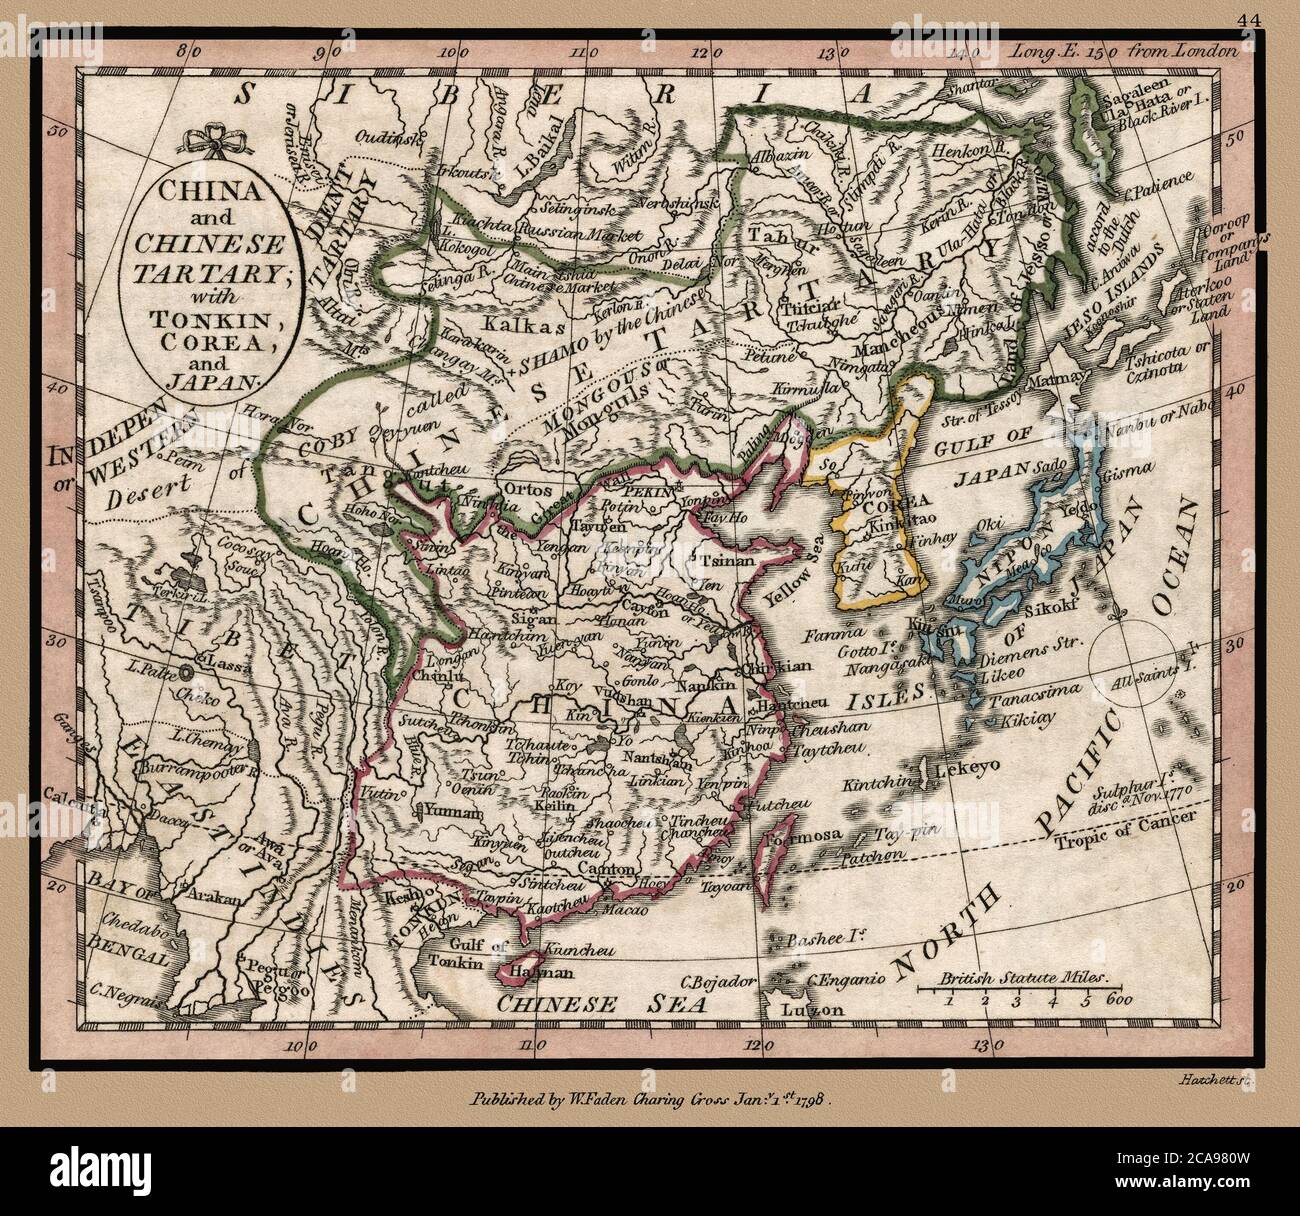 "China and Chinese Tartary, with Tonkin, Corea, and Japan." Map shows political borders and important landmarks. This is a beautifully detailed historic map reproduction. Original from a British atlas published by famed cartographer William Faden was created circa 1798. Stock Photo